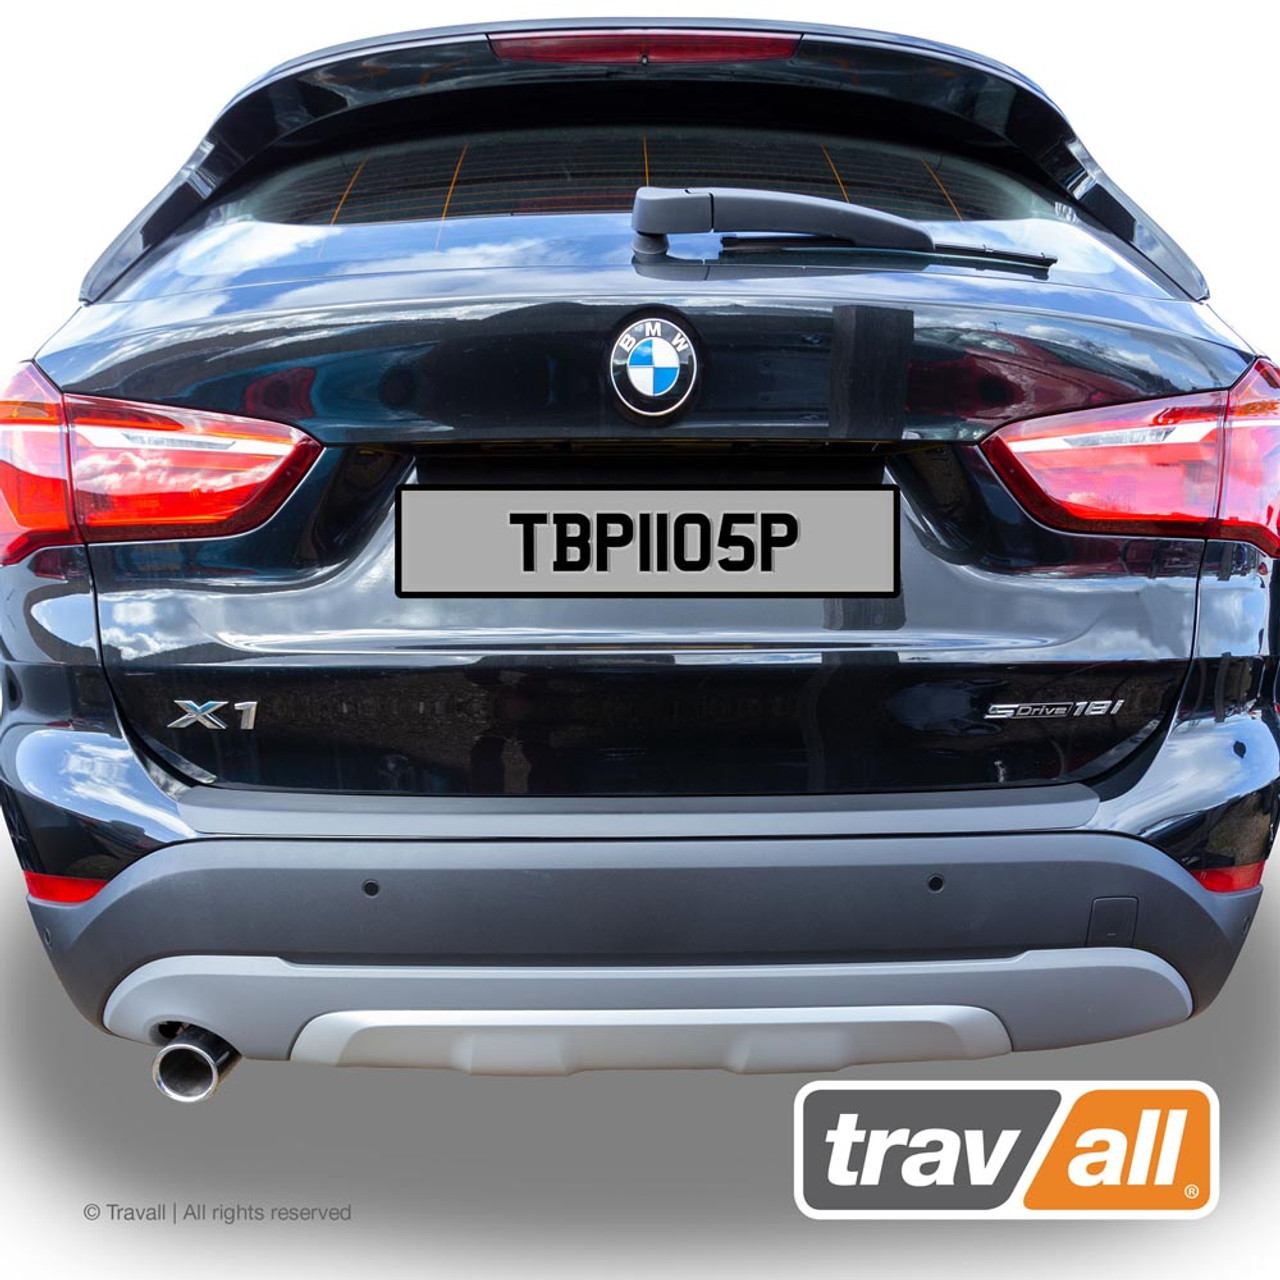 Plastic Bumper Protector for BMW X1 2015 onwards